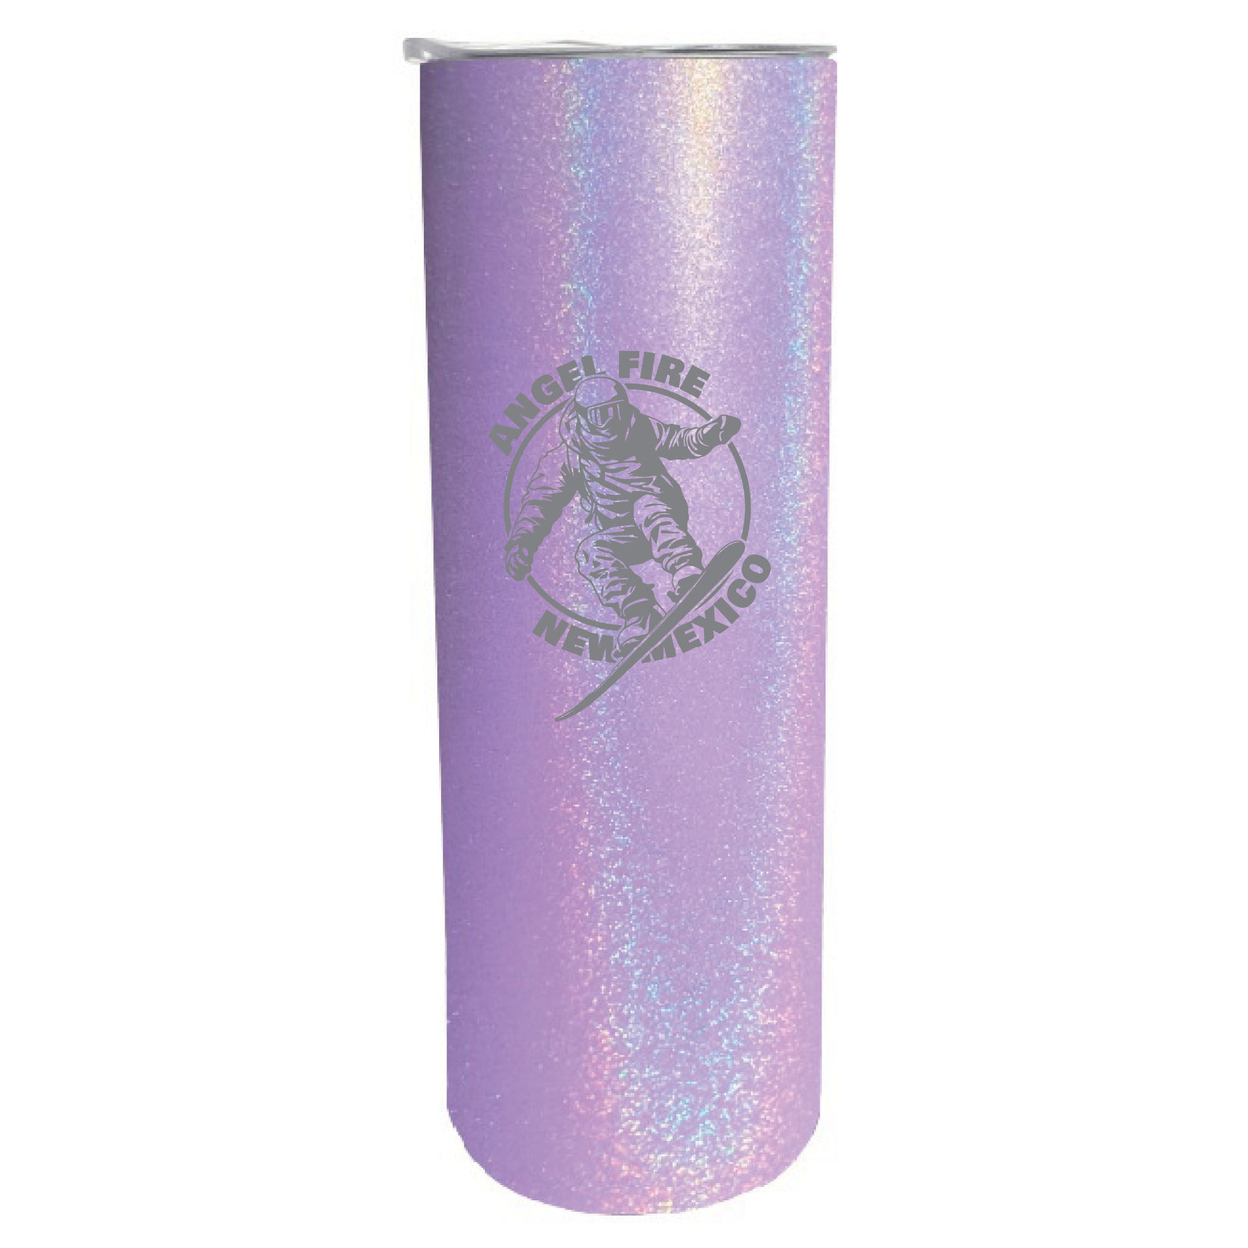 Angel Fire New Mexico Souvenir 20 Oz Engraved Insulated Stainless Steel Skinny Tumbler - Purple Glitter,,2-Pack